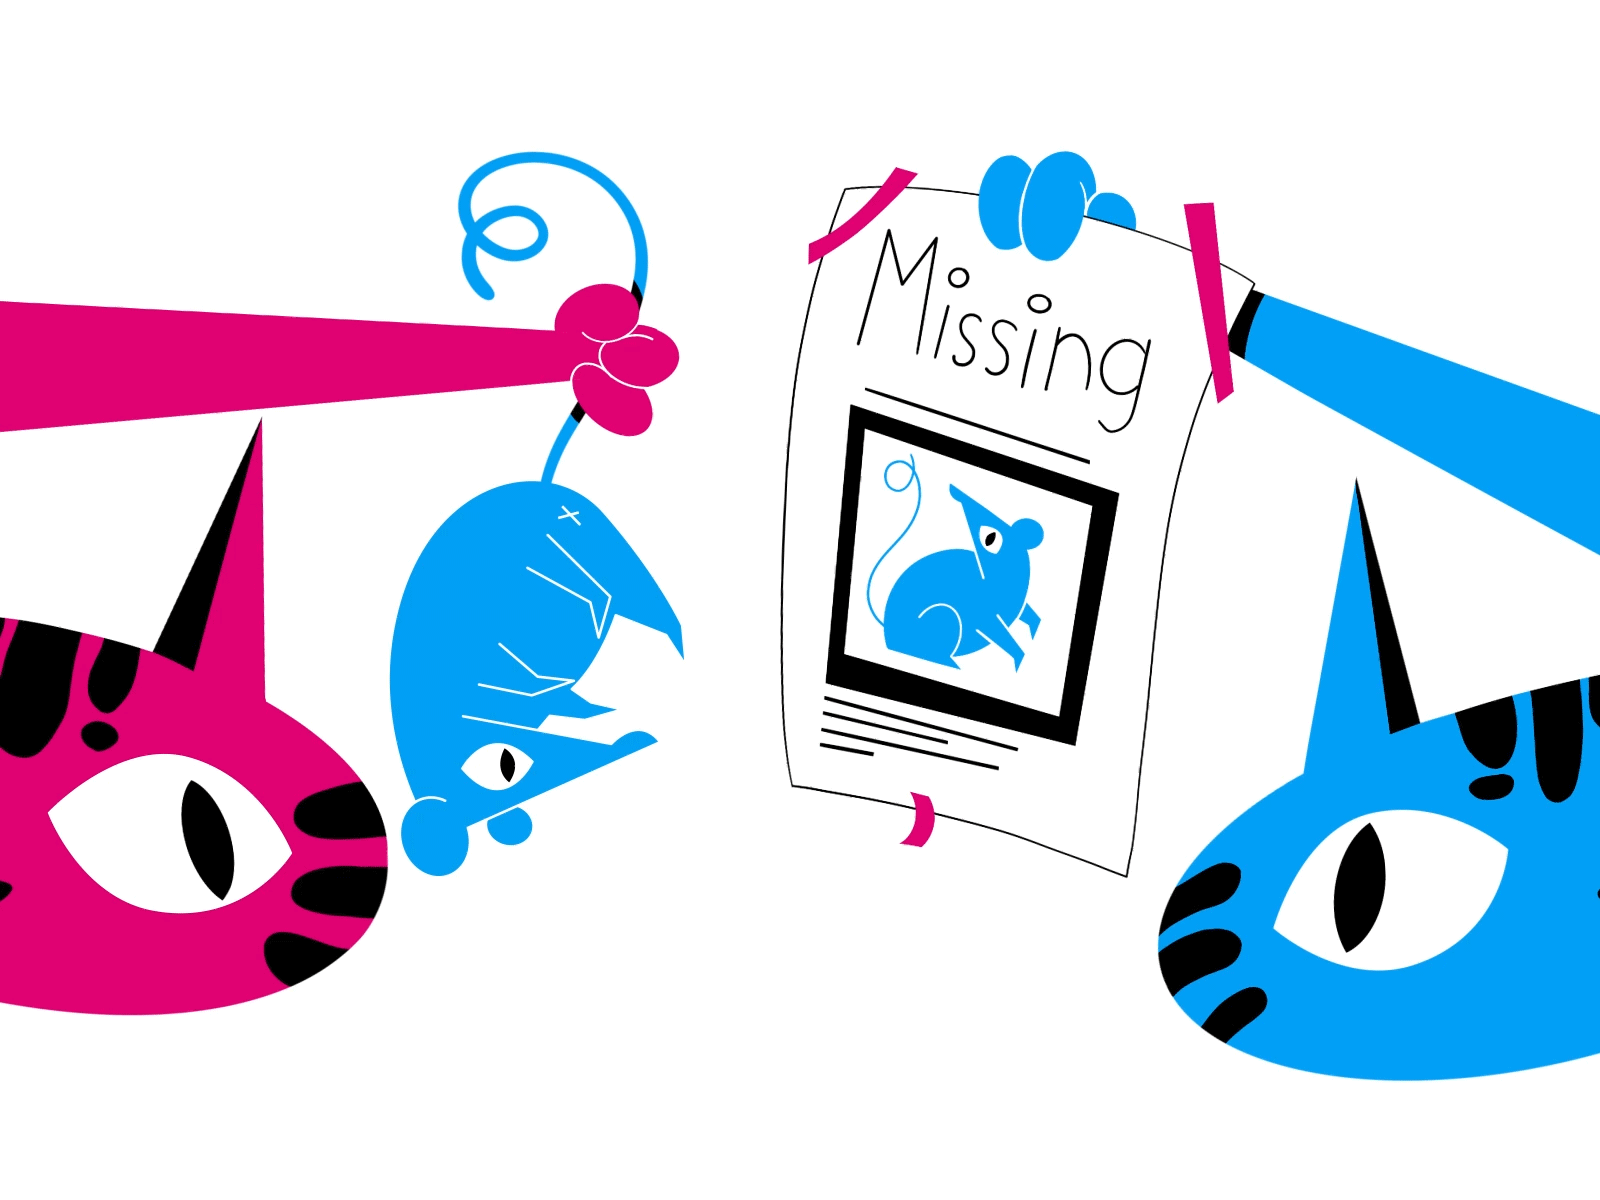 Finally found adobeaftereffects animal animation cats digital eyes illustration ipadpro missing mouse poster procreate